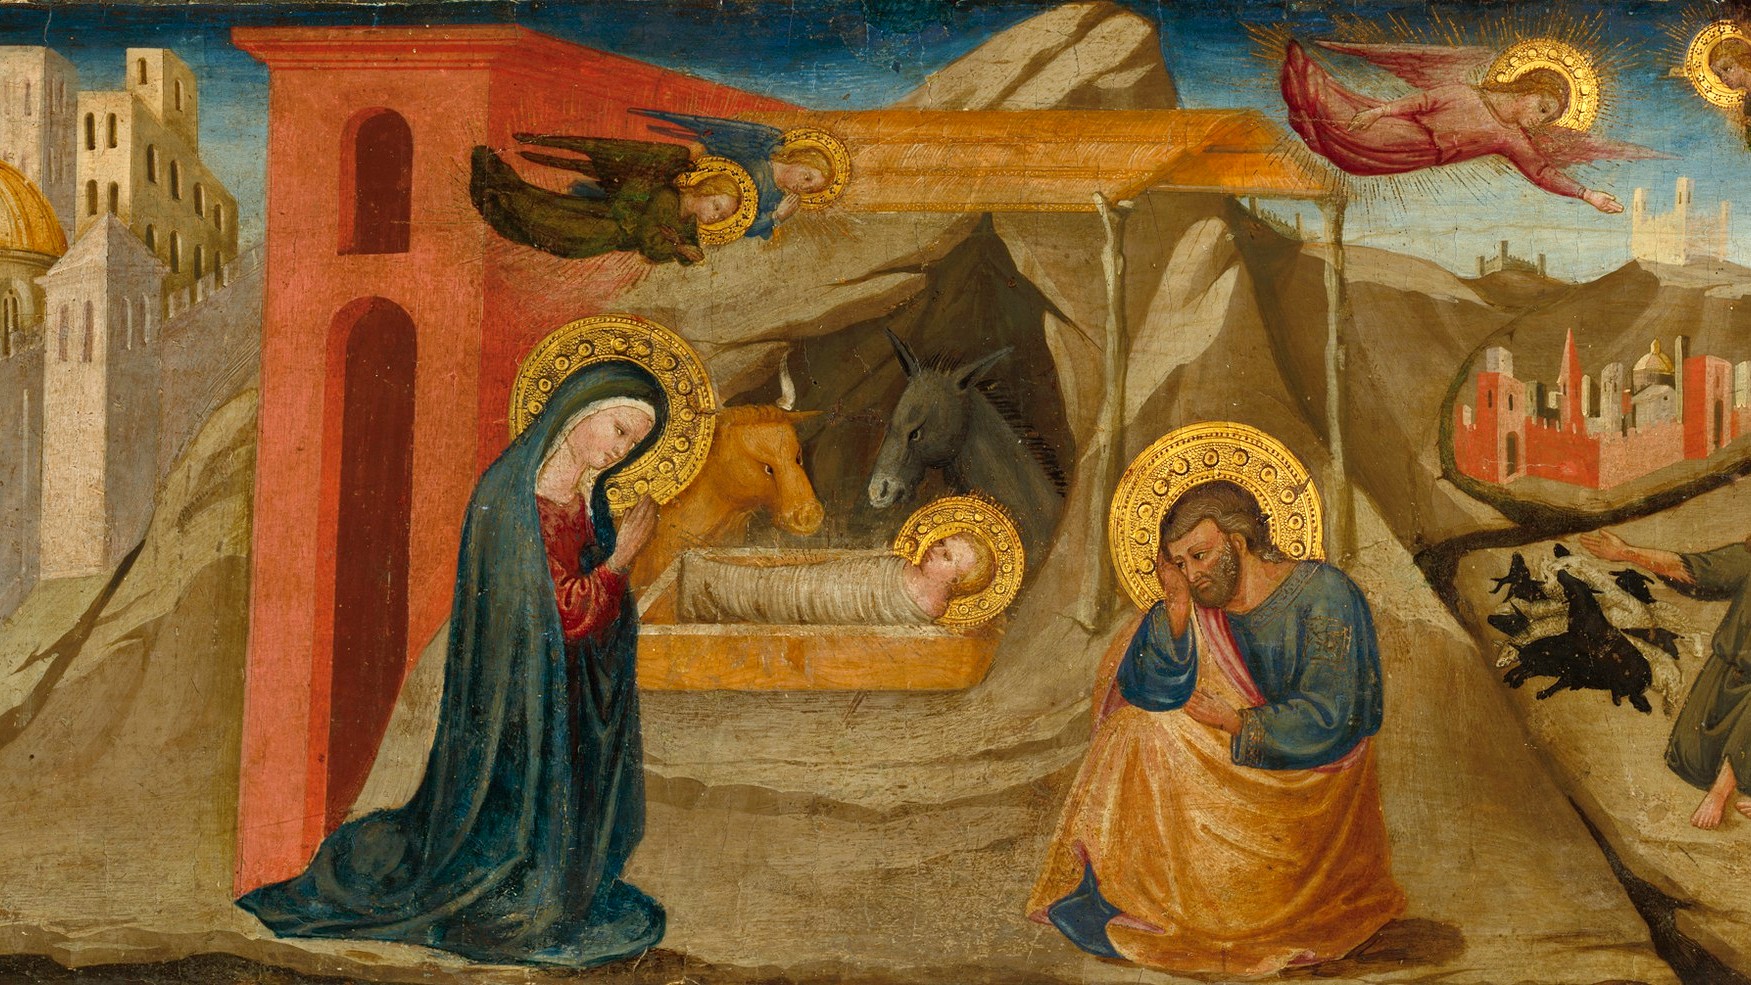 The Nativity and the Annunciation to the Shepherds, by Bicci di Lorenzo